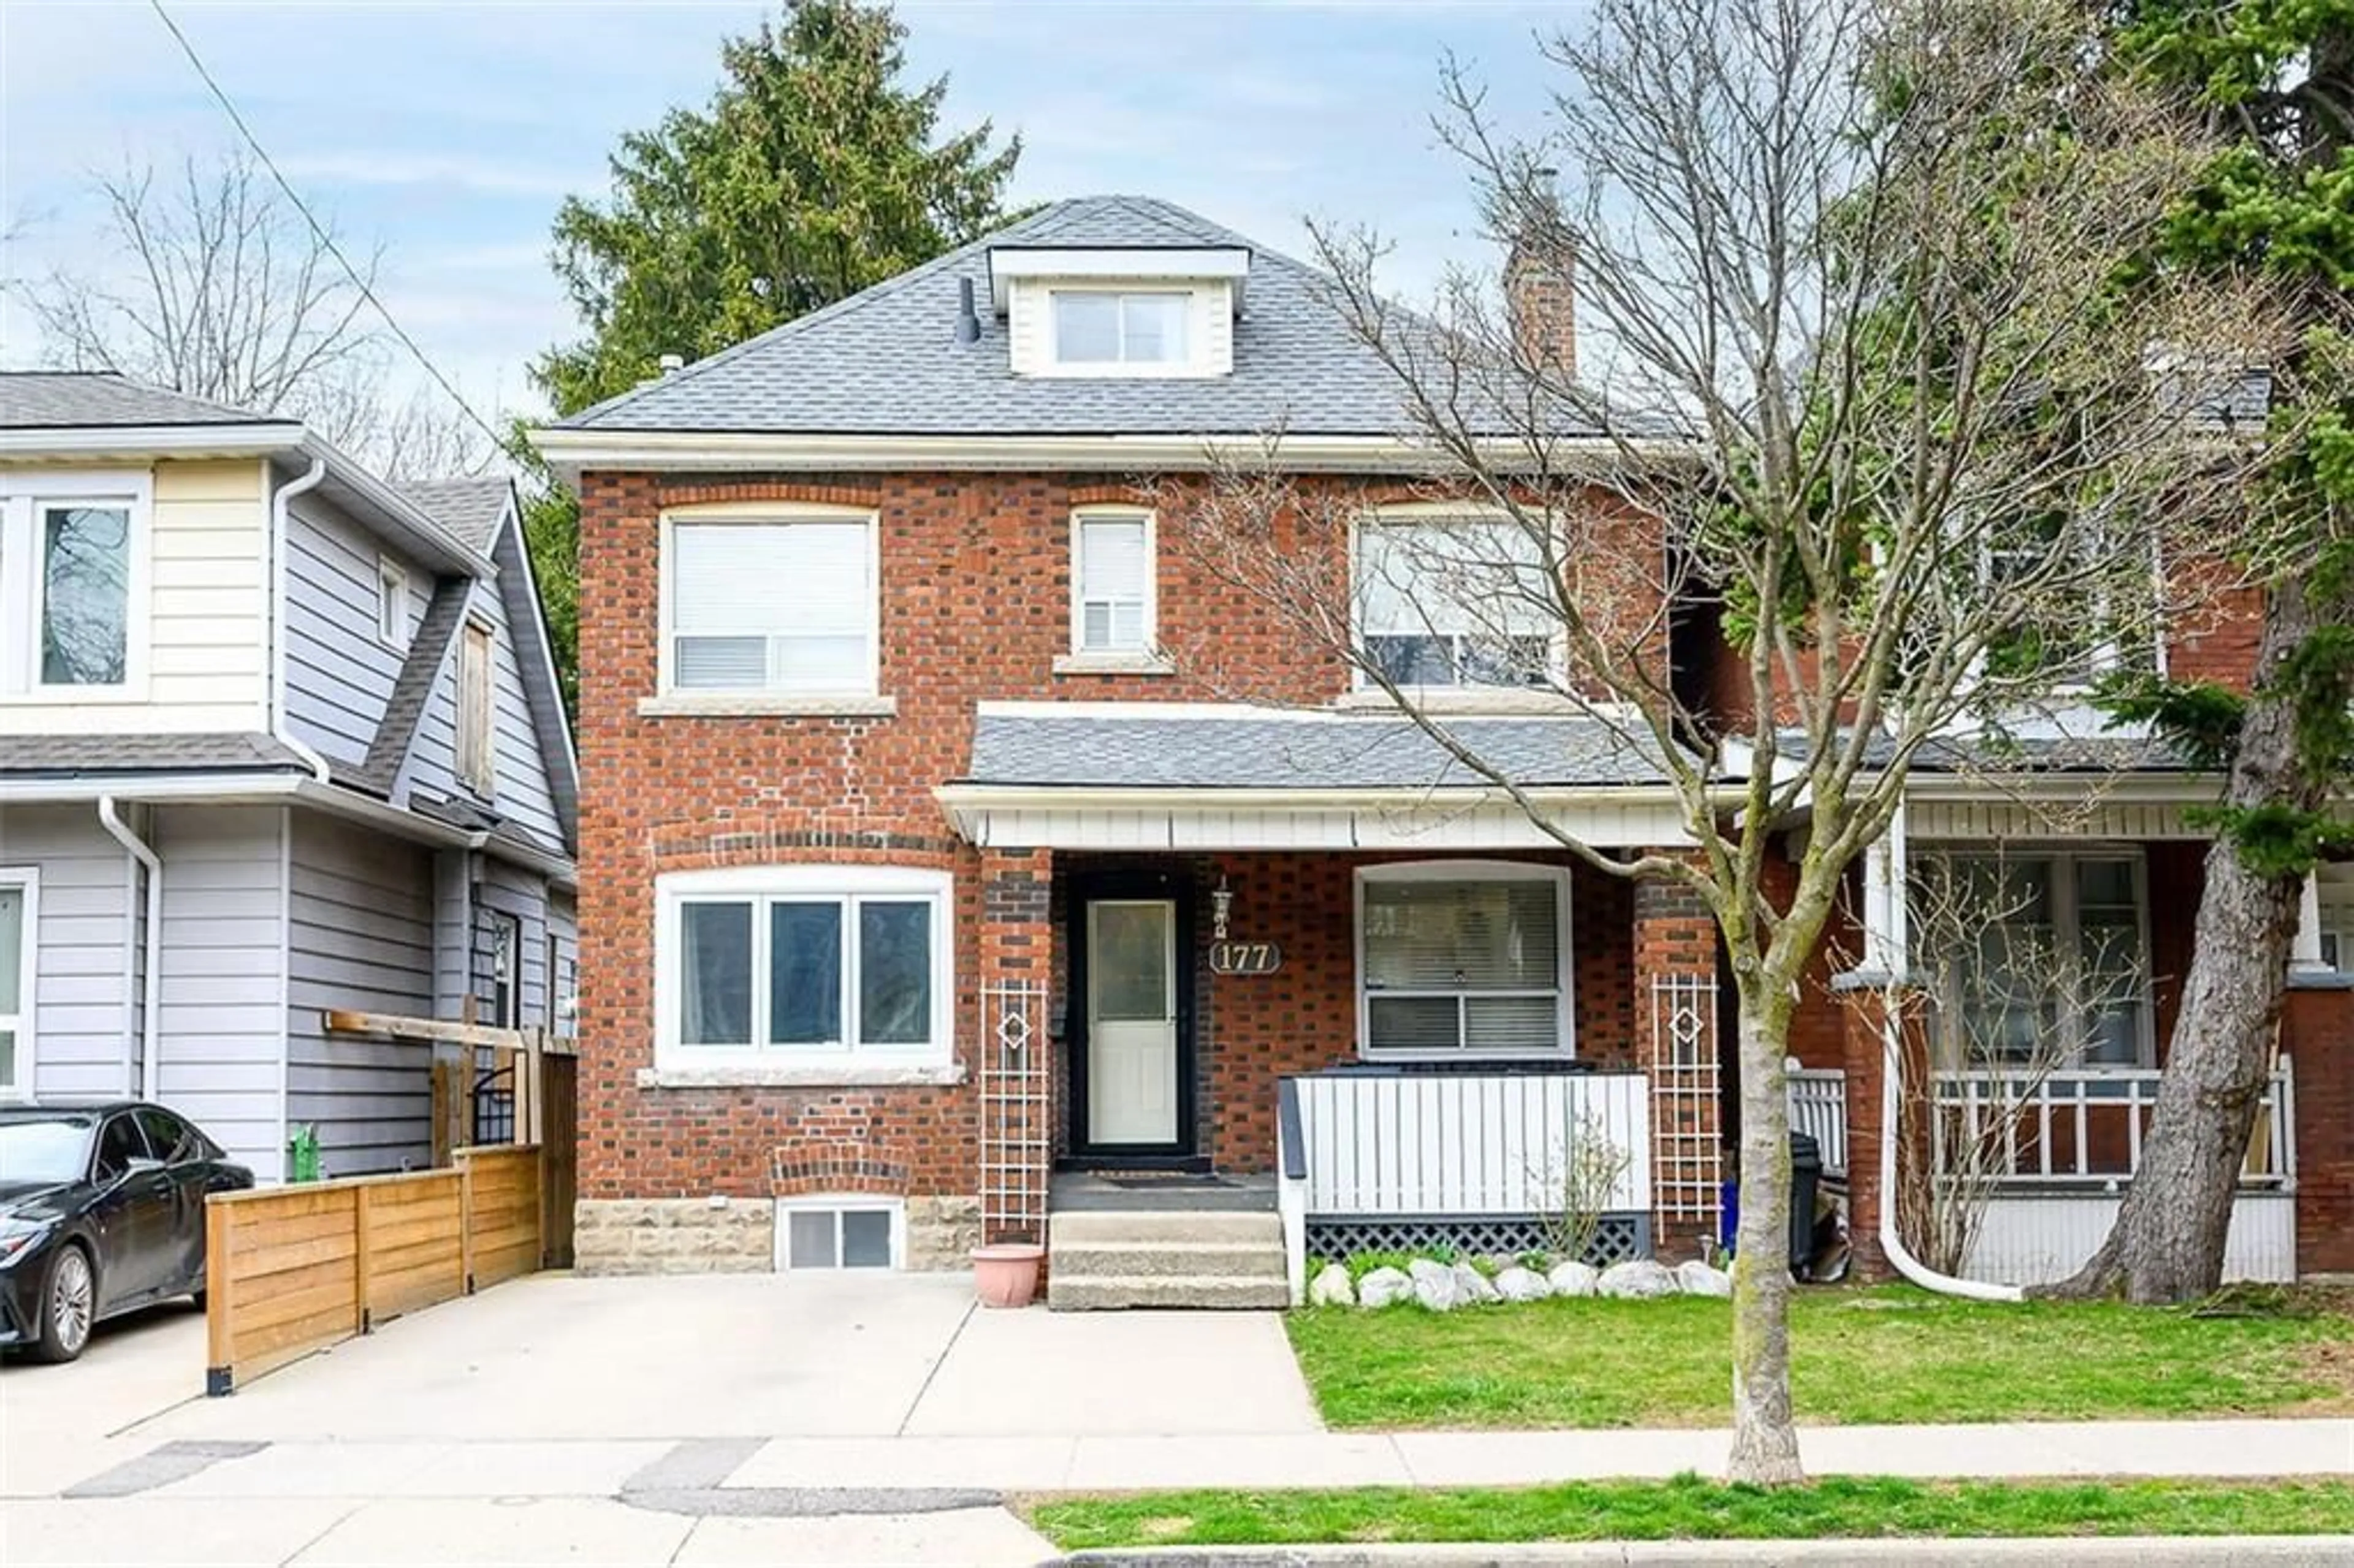 Home with brick exterior material for 177 MAPLEWOOD Ave, Hamilton Ontario L8M 1X6